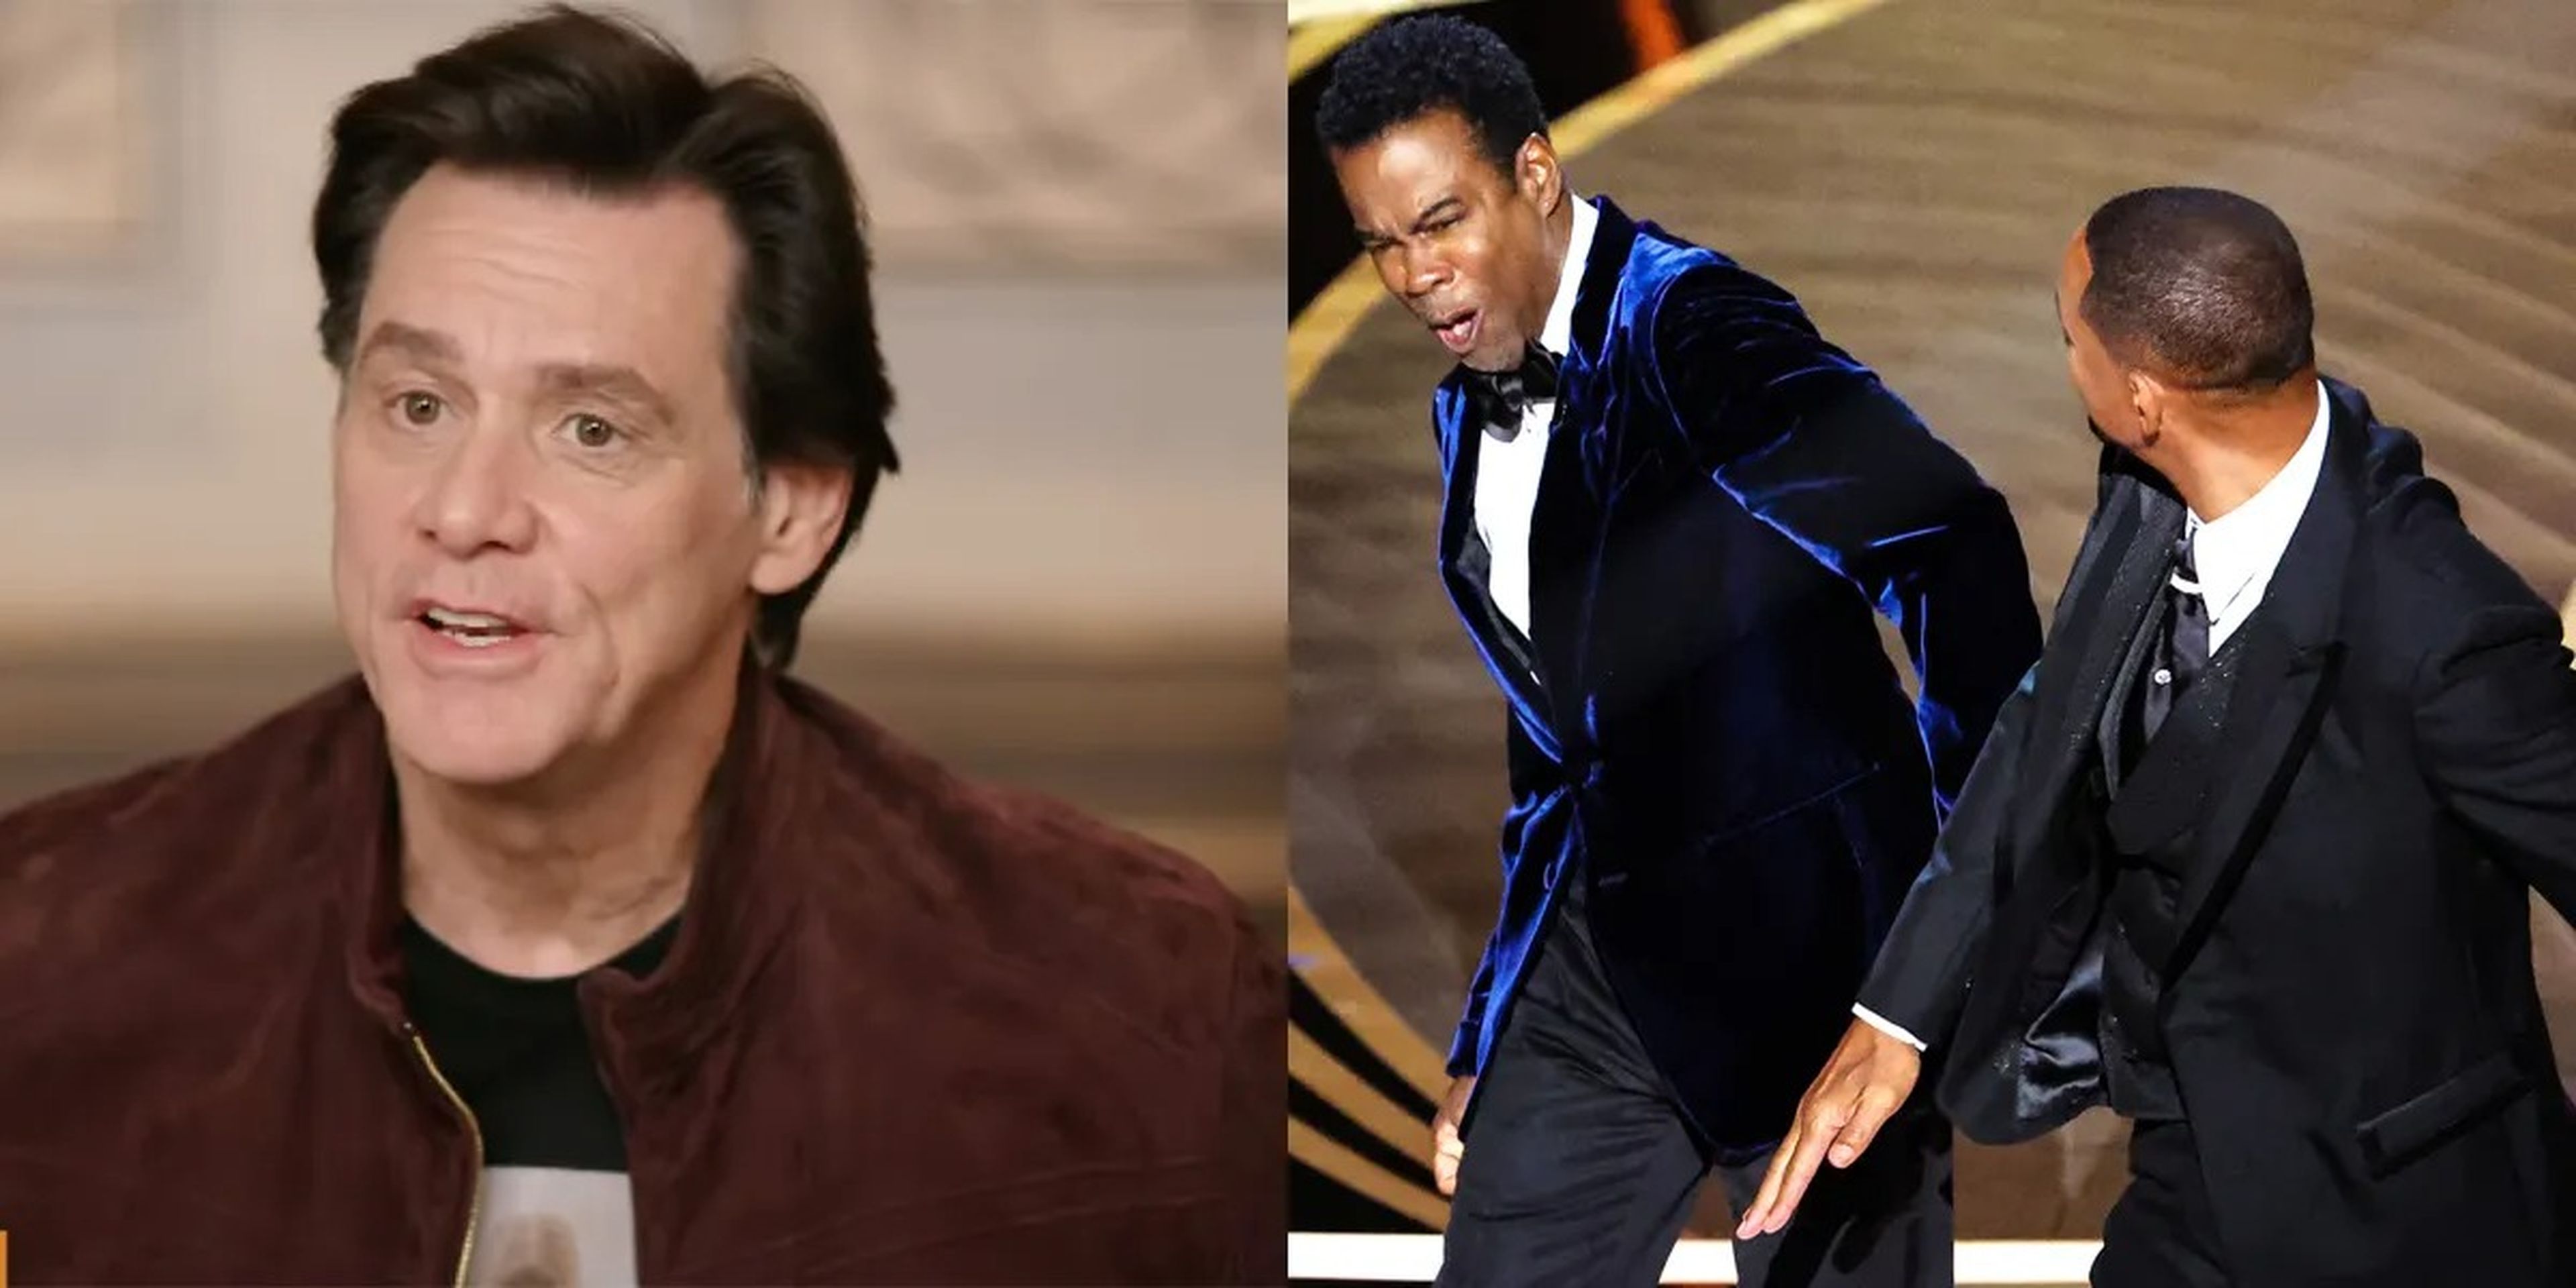 Jim Carrey reacts to Will Smith slap of Chris Rock.